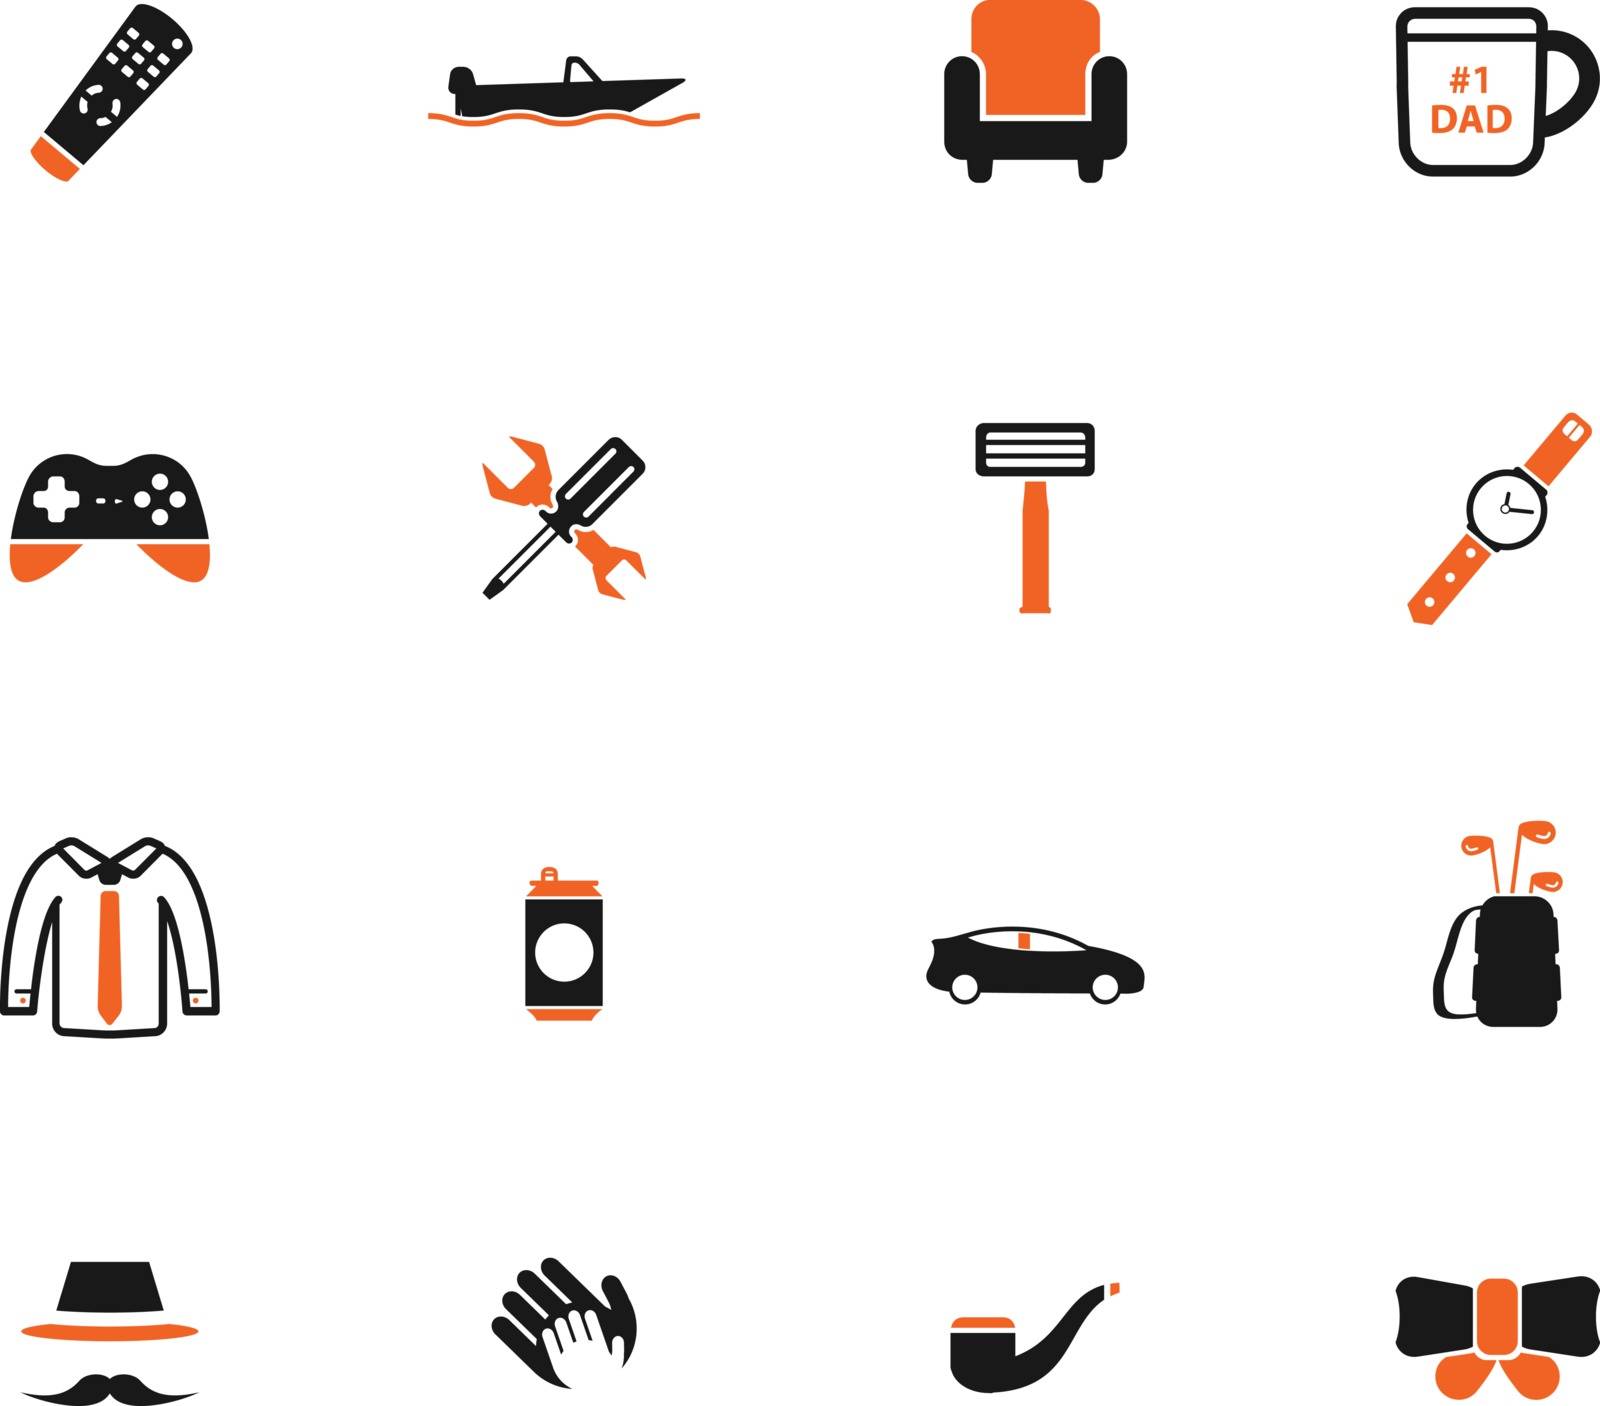 Fathers day simply icons for web and user interface